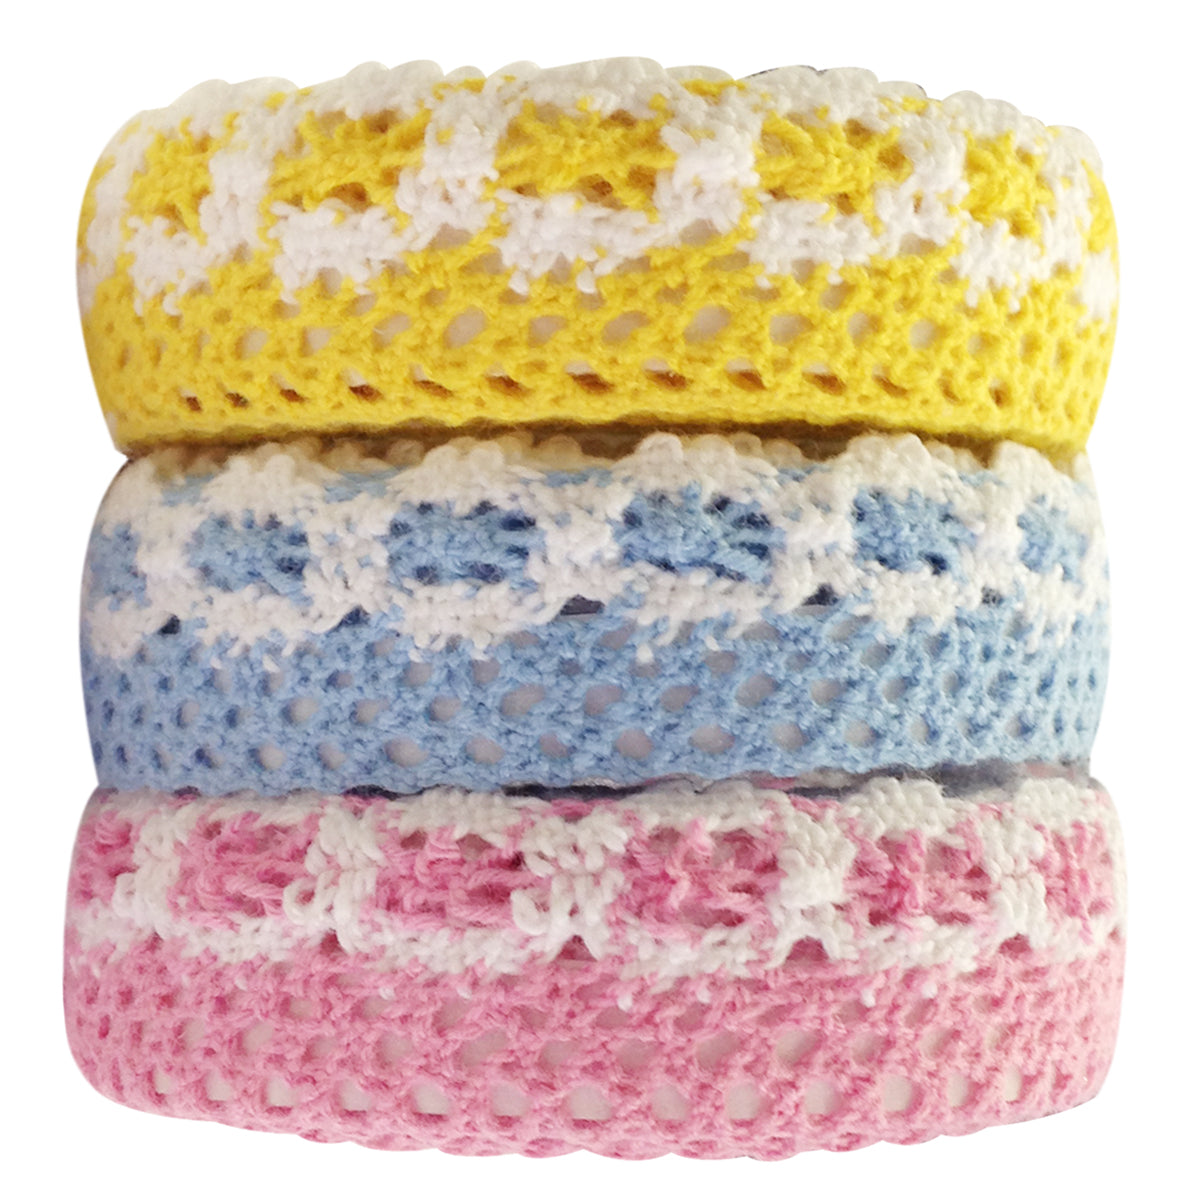 Wrapables Decorative Lace Tape (Set of 3)